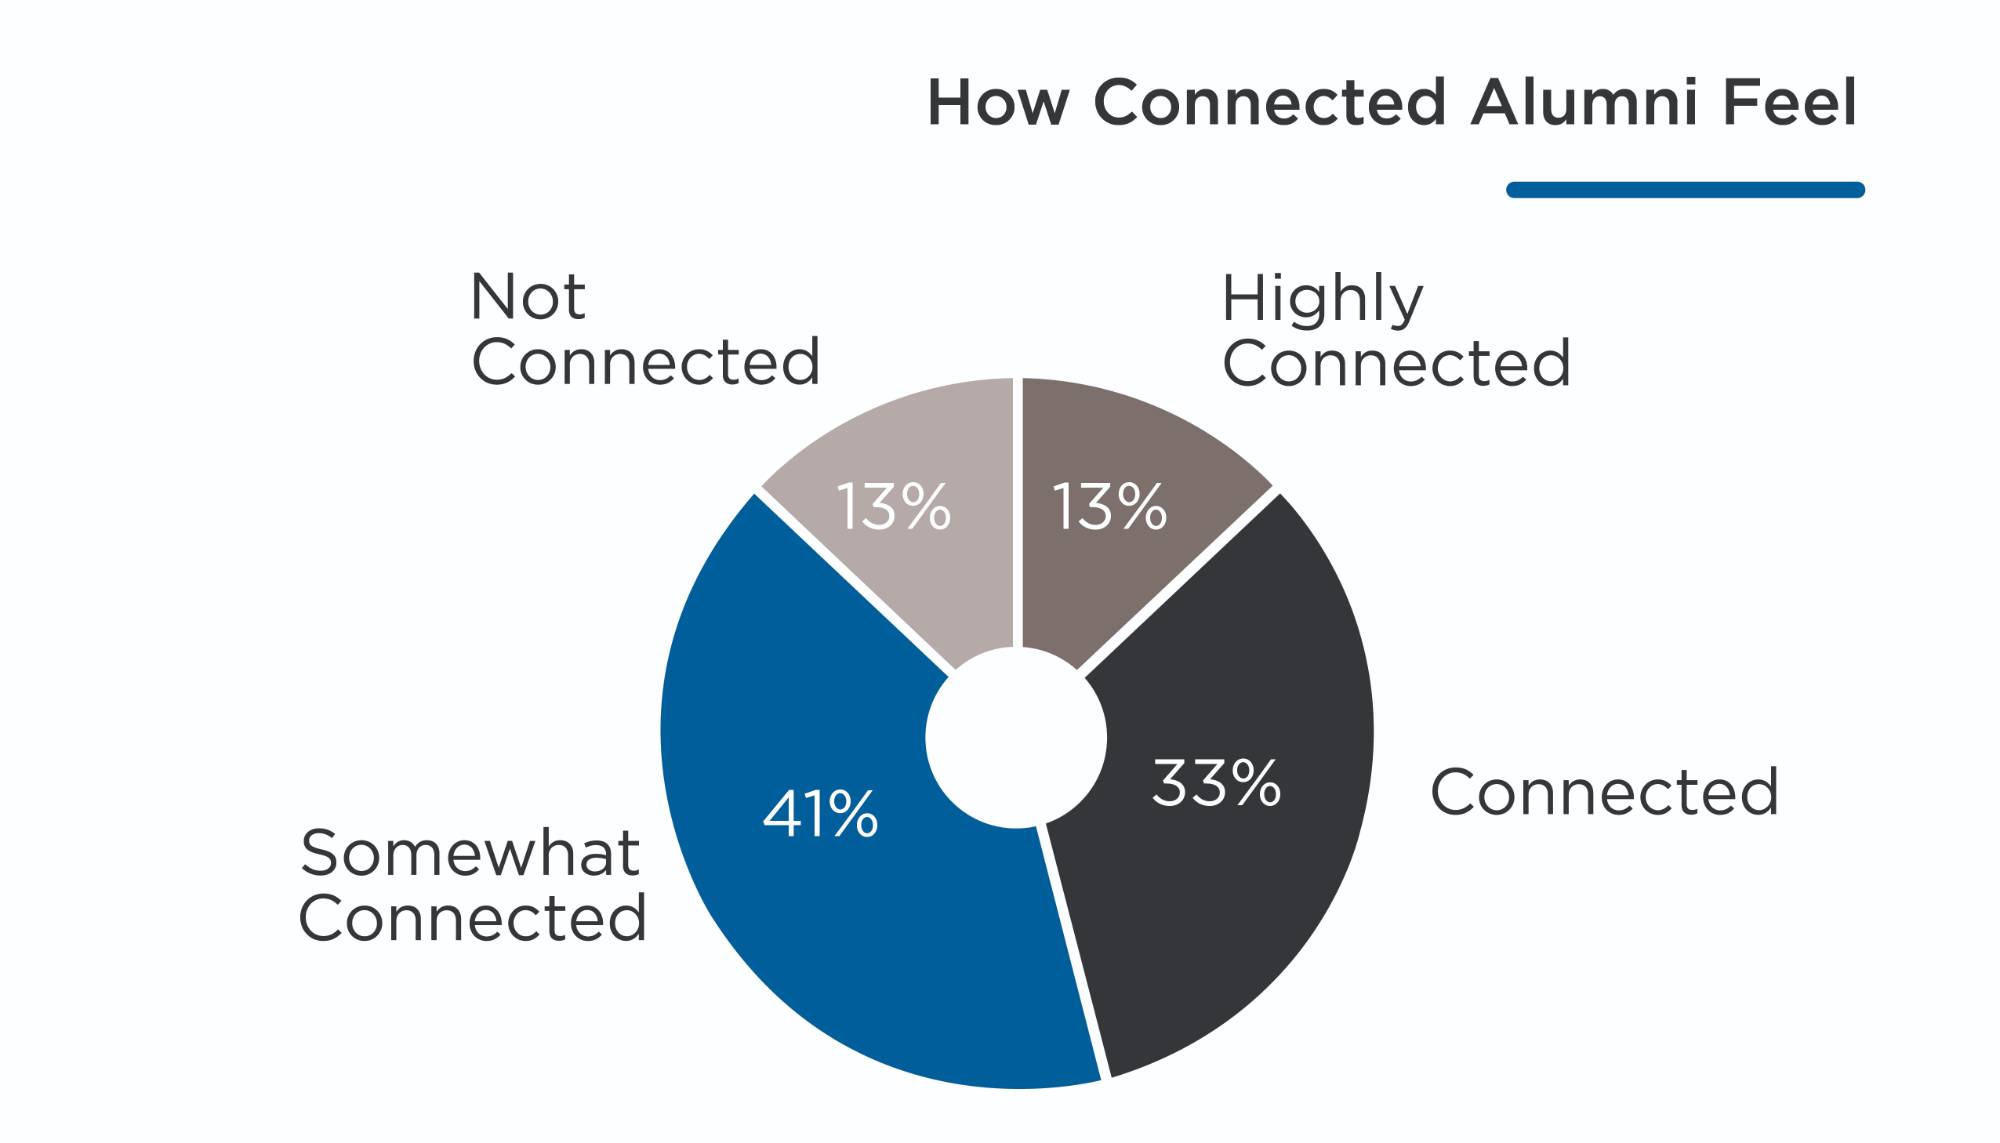 How Connected Alumni Feel. A pie graph showing that 13% of respondents feel they are not connected, 41% are somewhat connected, 33% are connected, and 13% are highly connected.